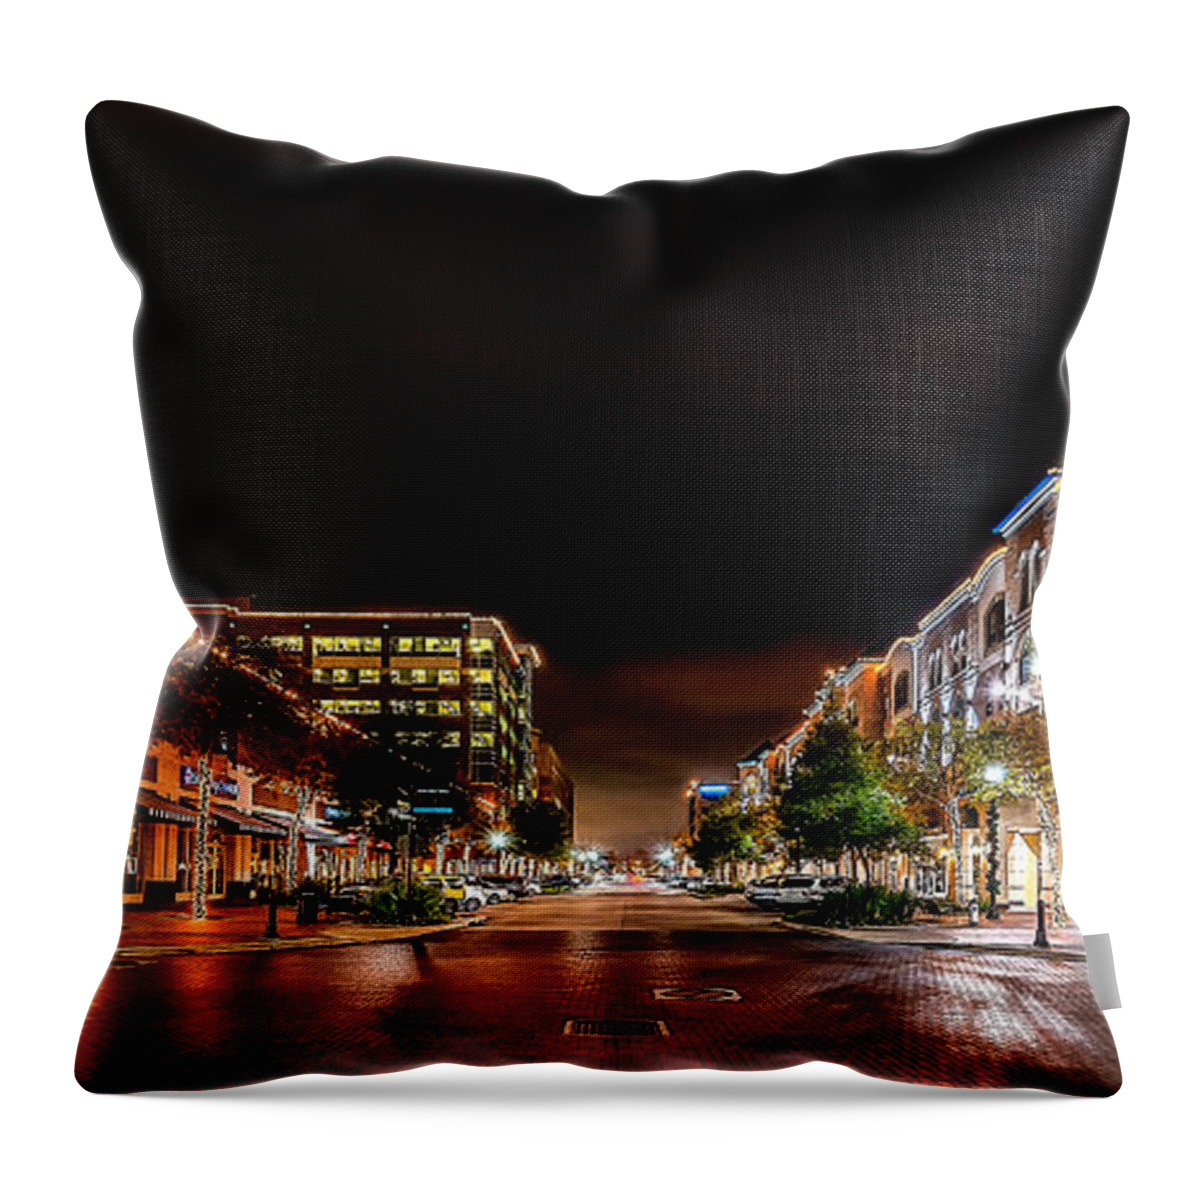 Sugar Land Town Center Throw Pillow featuring the photograph Sugar Land Town Square by David Morefield